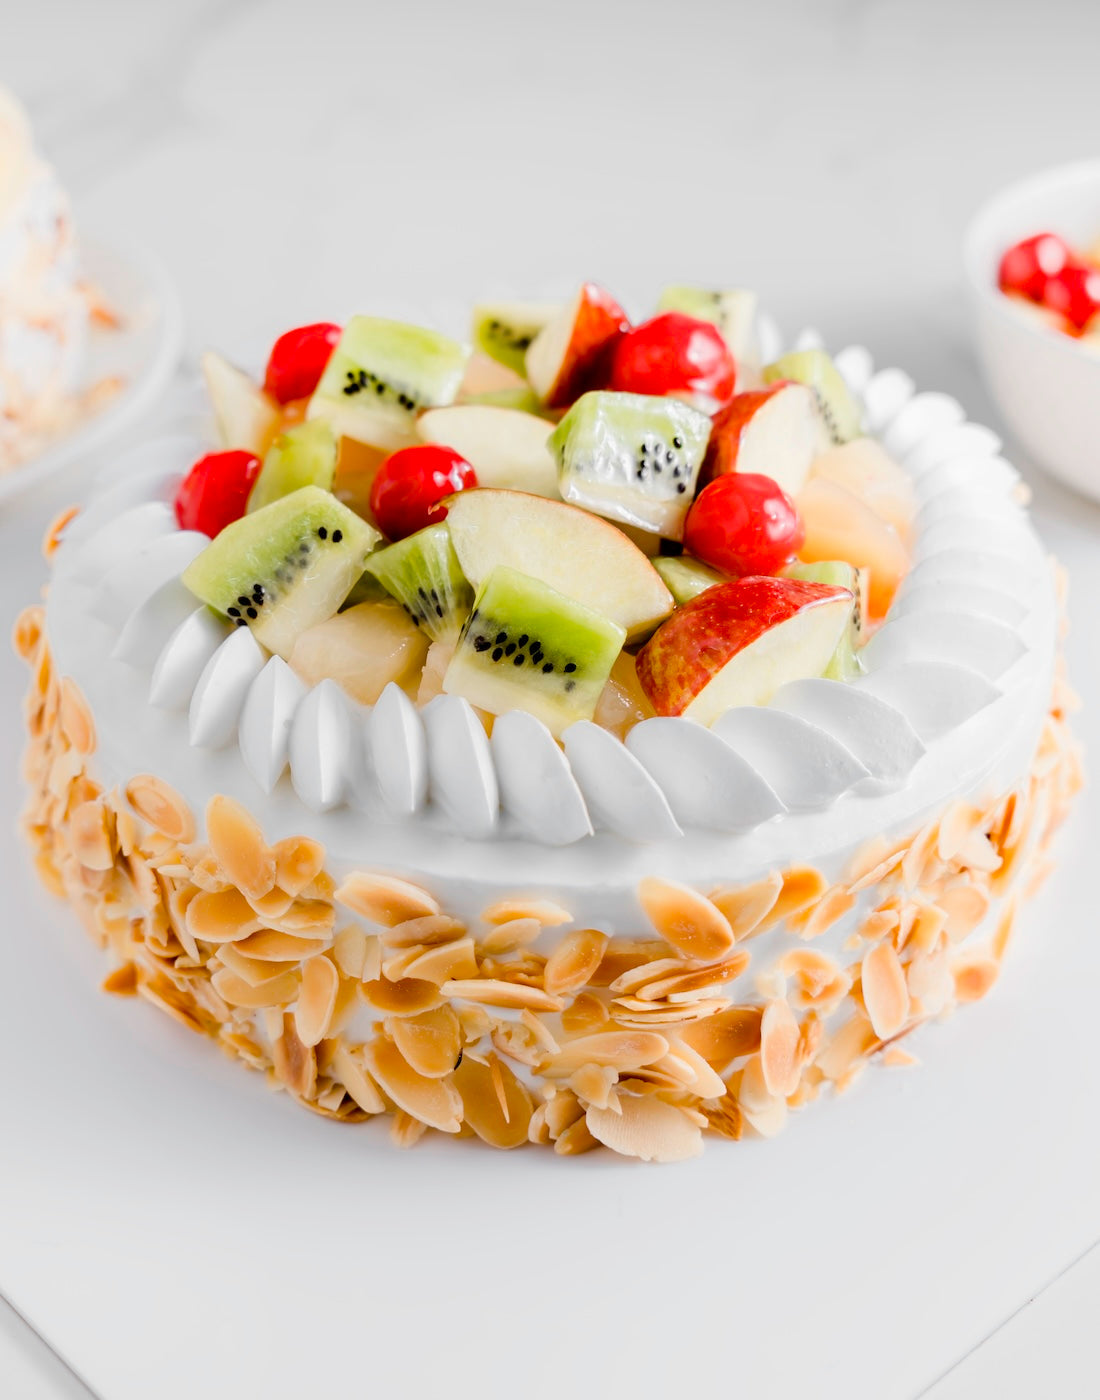 Online Cake Delivery, 3 Hour Delivery, Gurgaon and Greater Noida, Fruit Cake